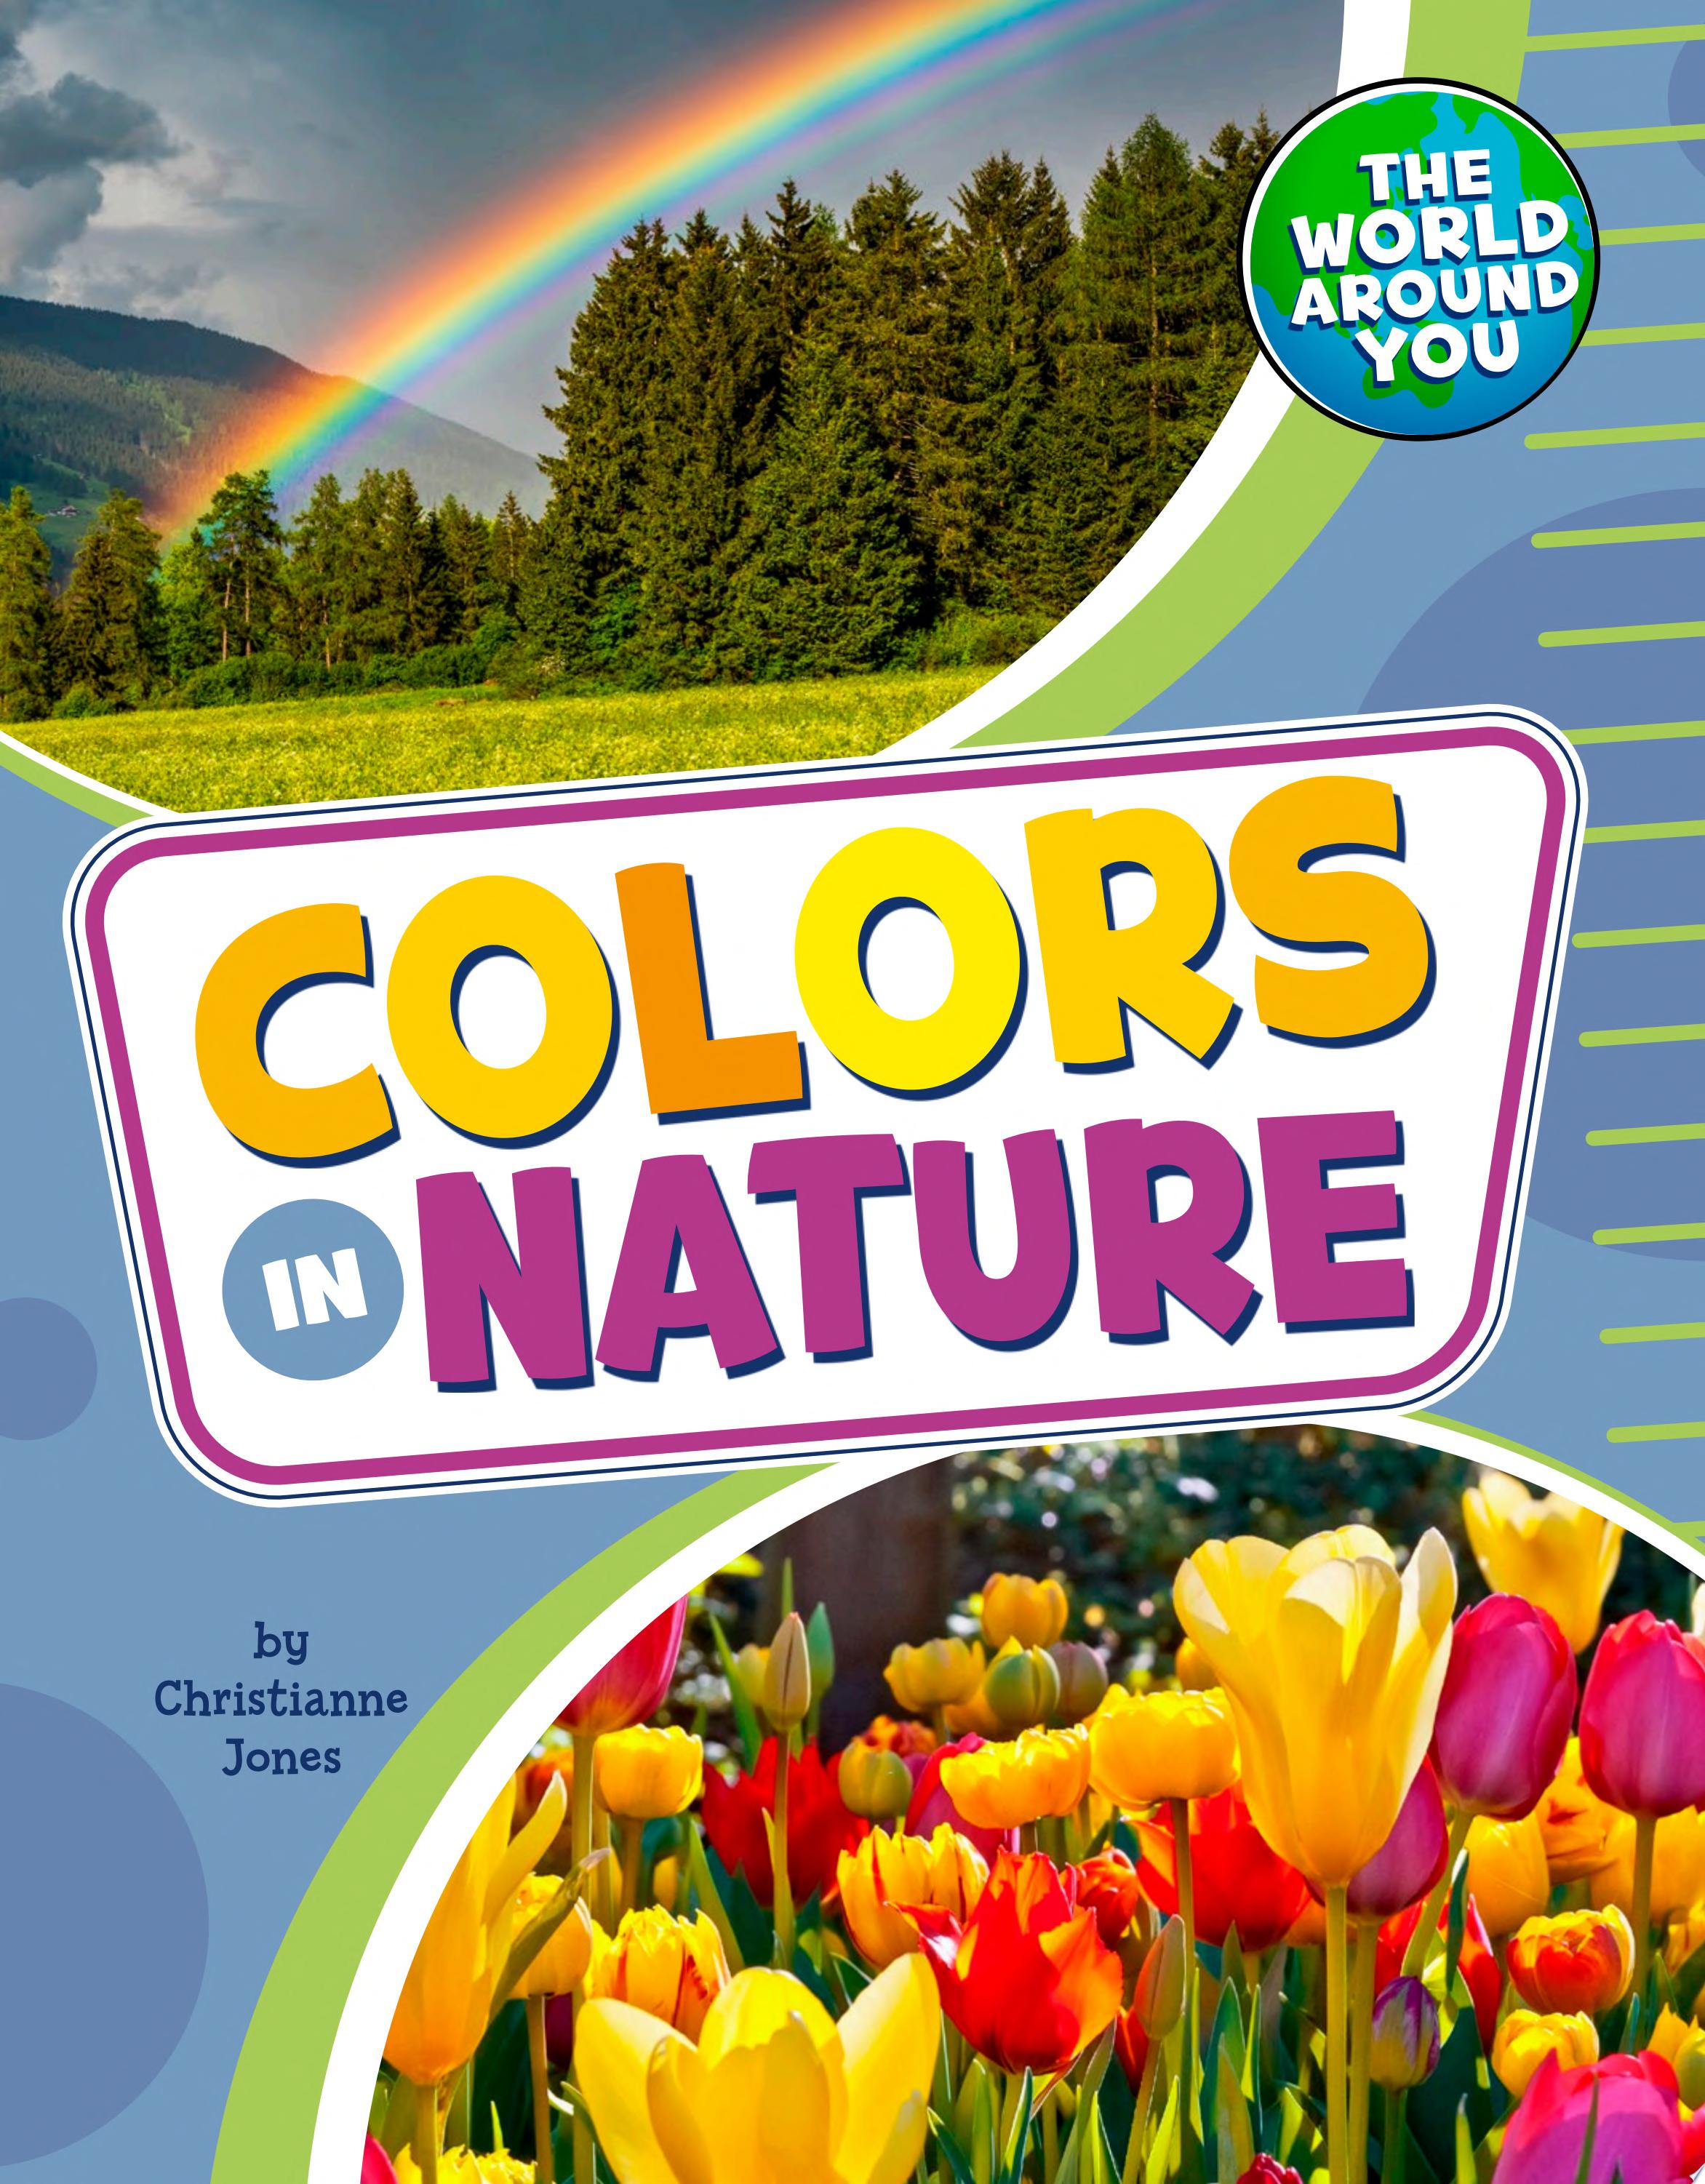 Image for "Colors in Nature"